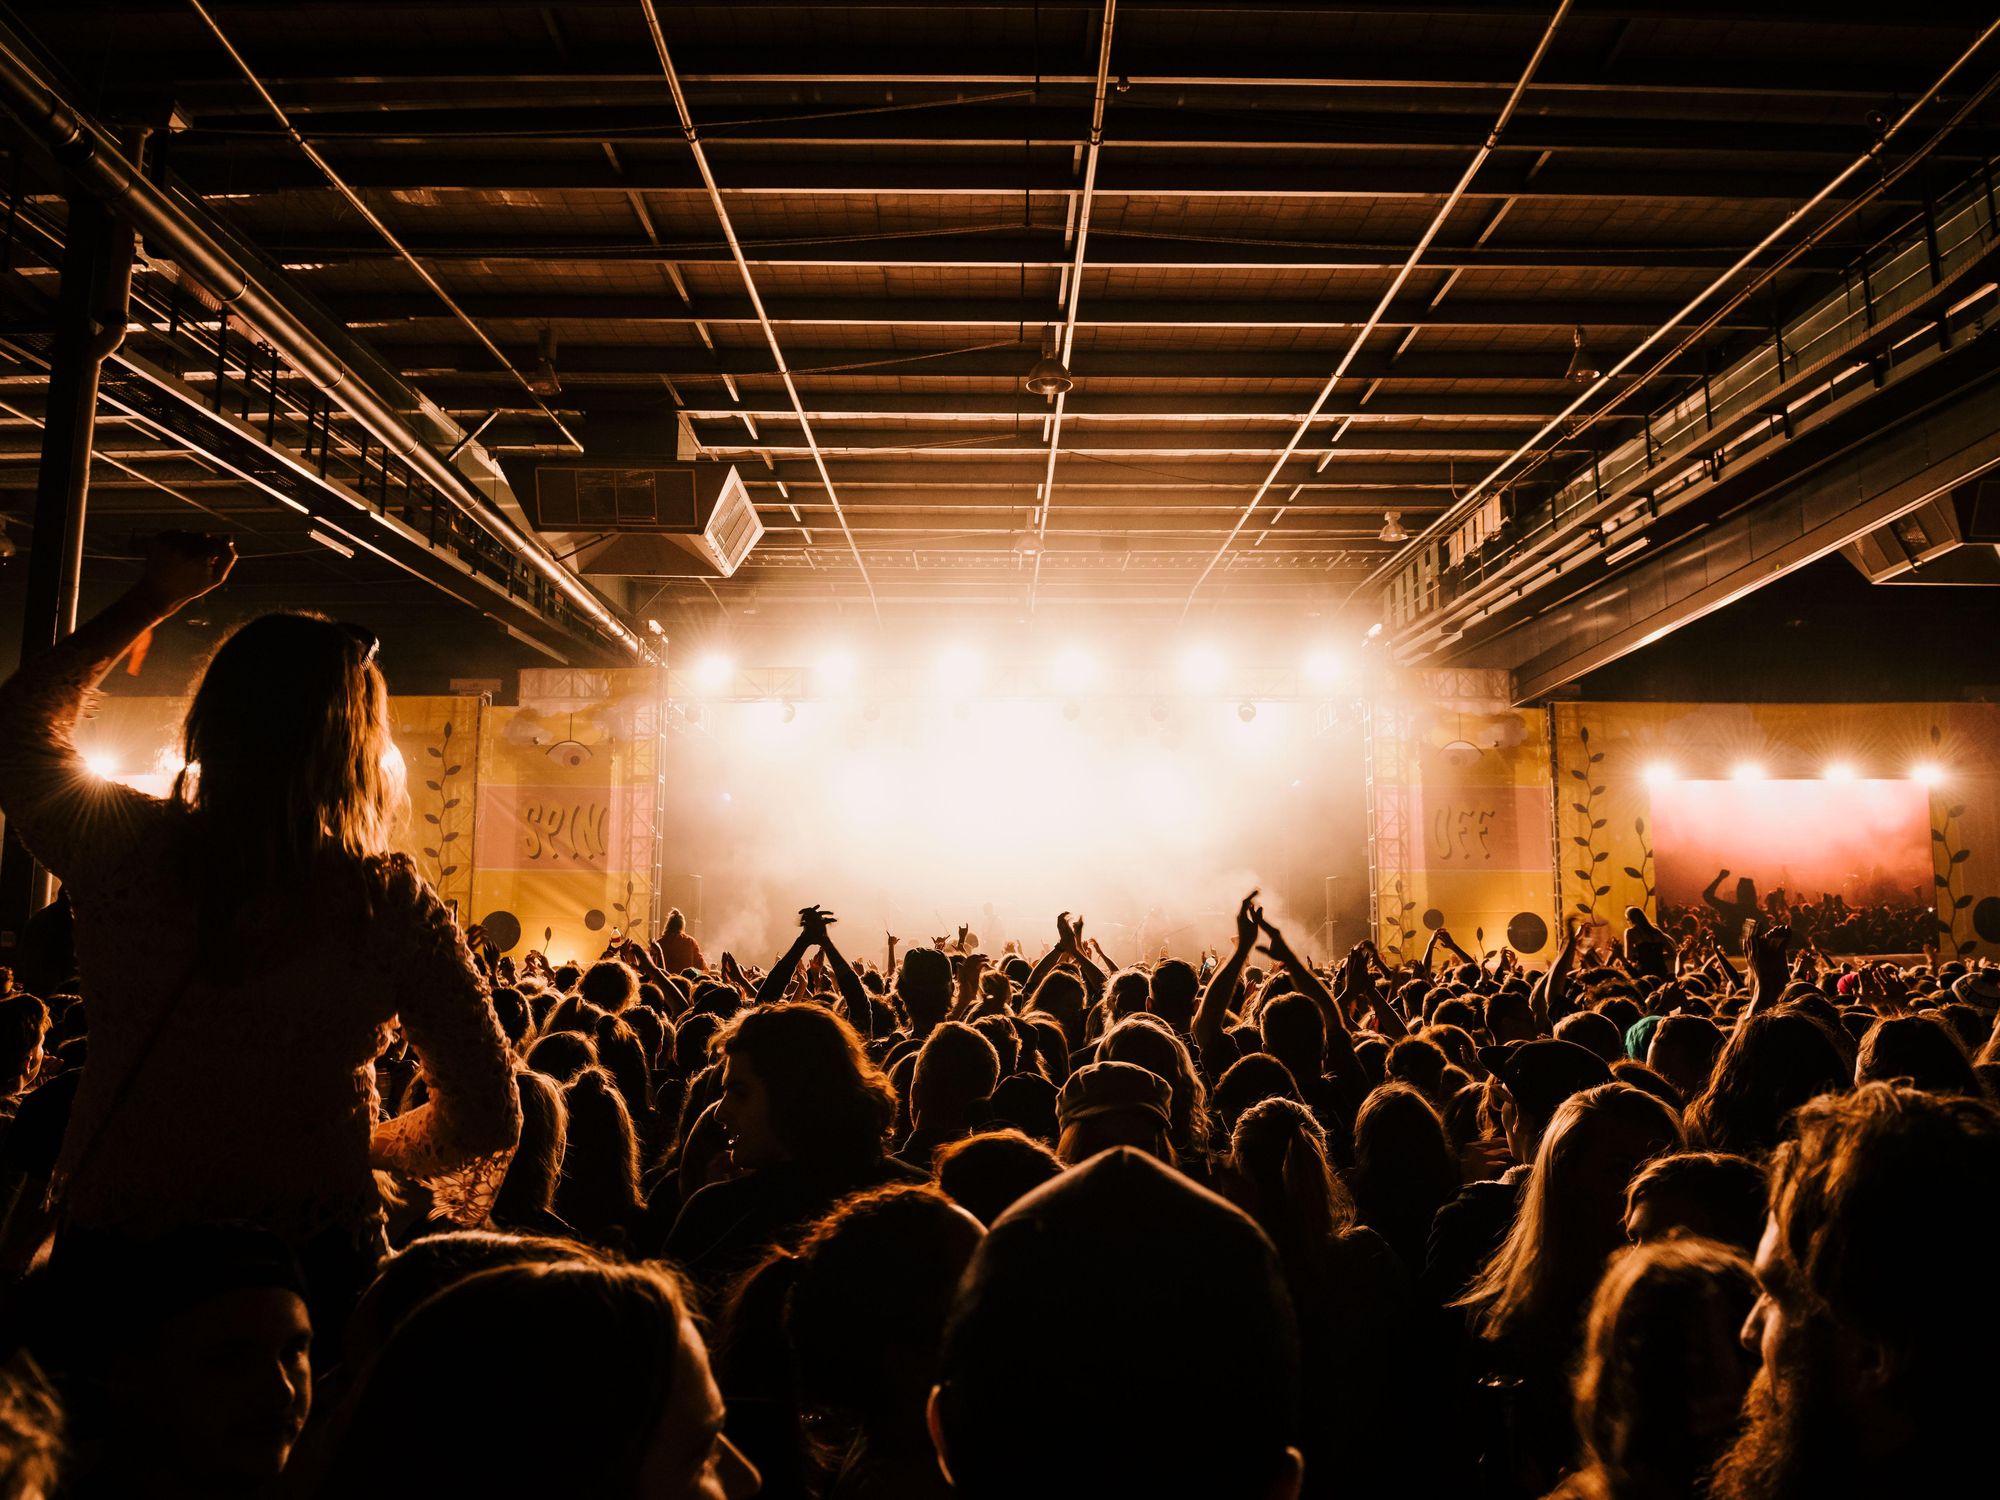 SaveLive Raises $135 Million to Save Small Music Venues Hurt by the Pandemic